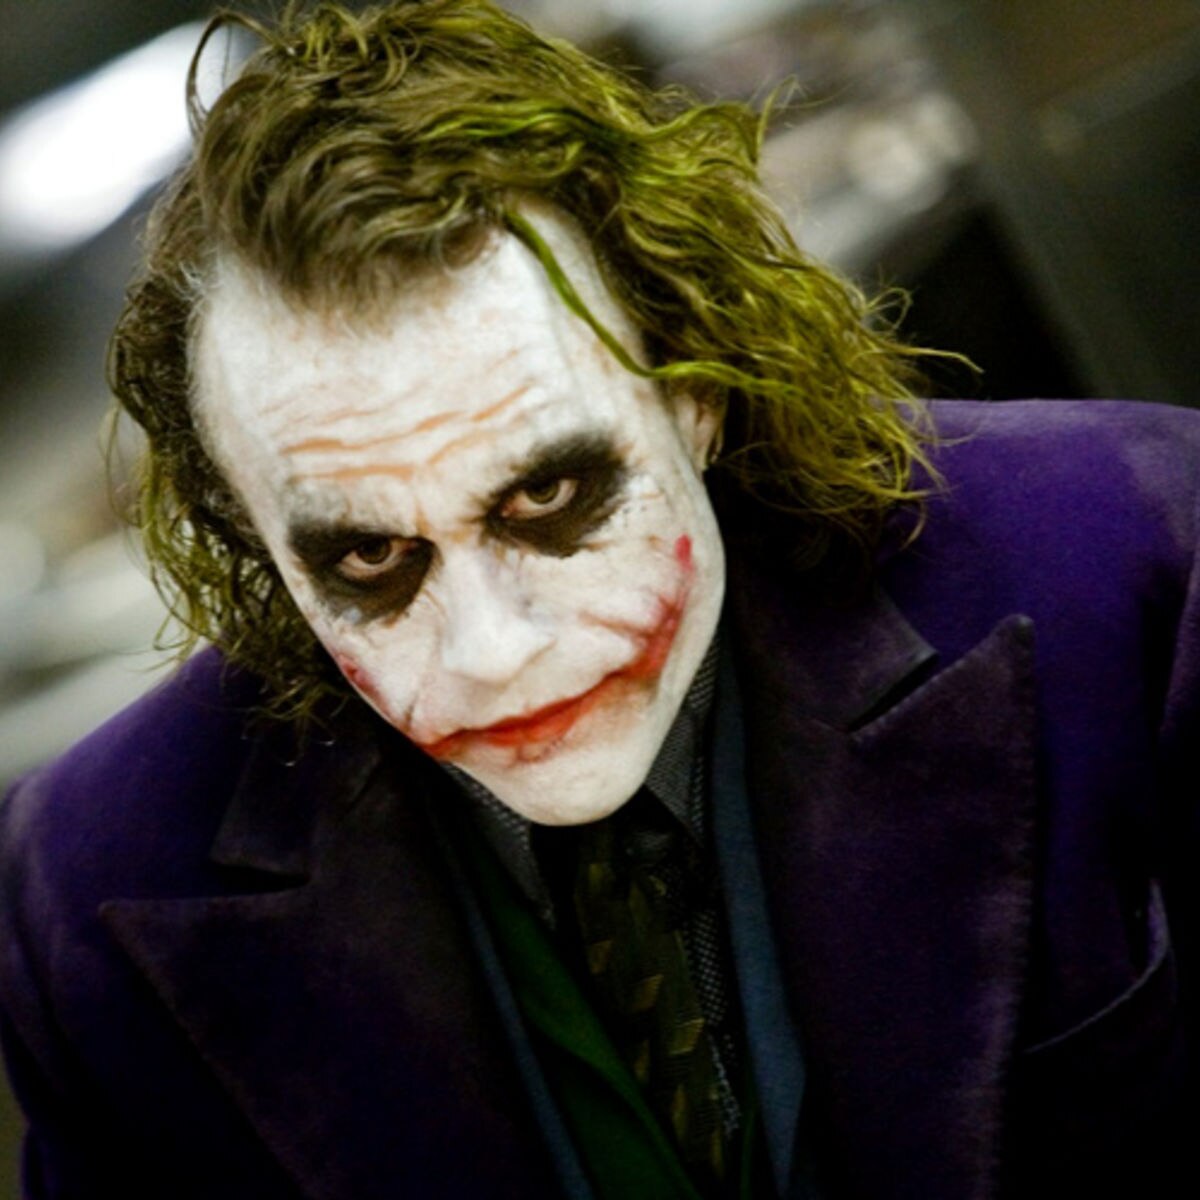 Heath Ledger’s death changed Gambol’s fate in The Dark Knight, says ...